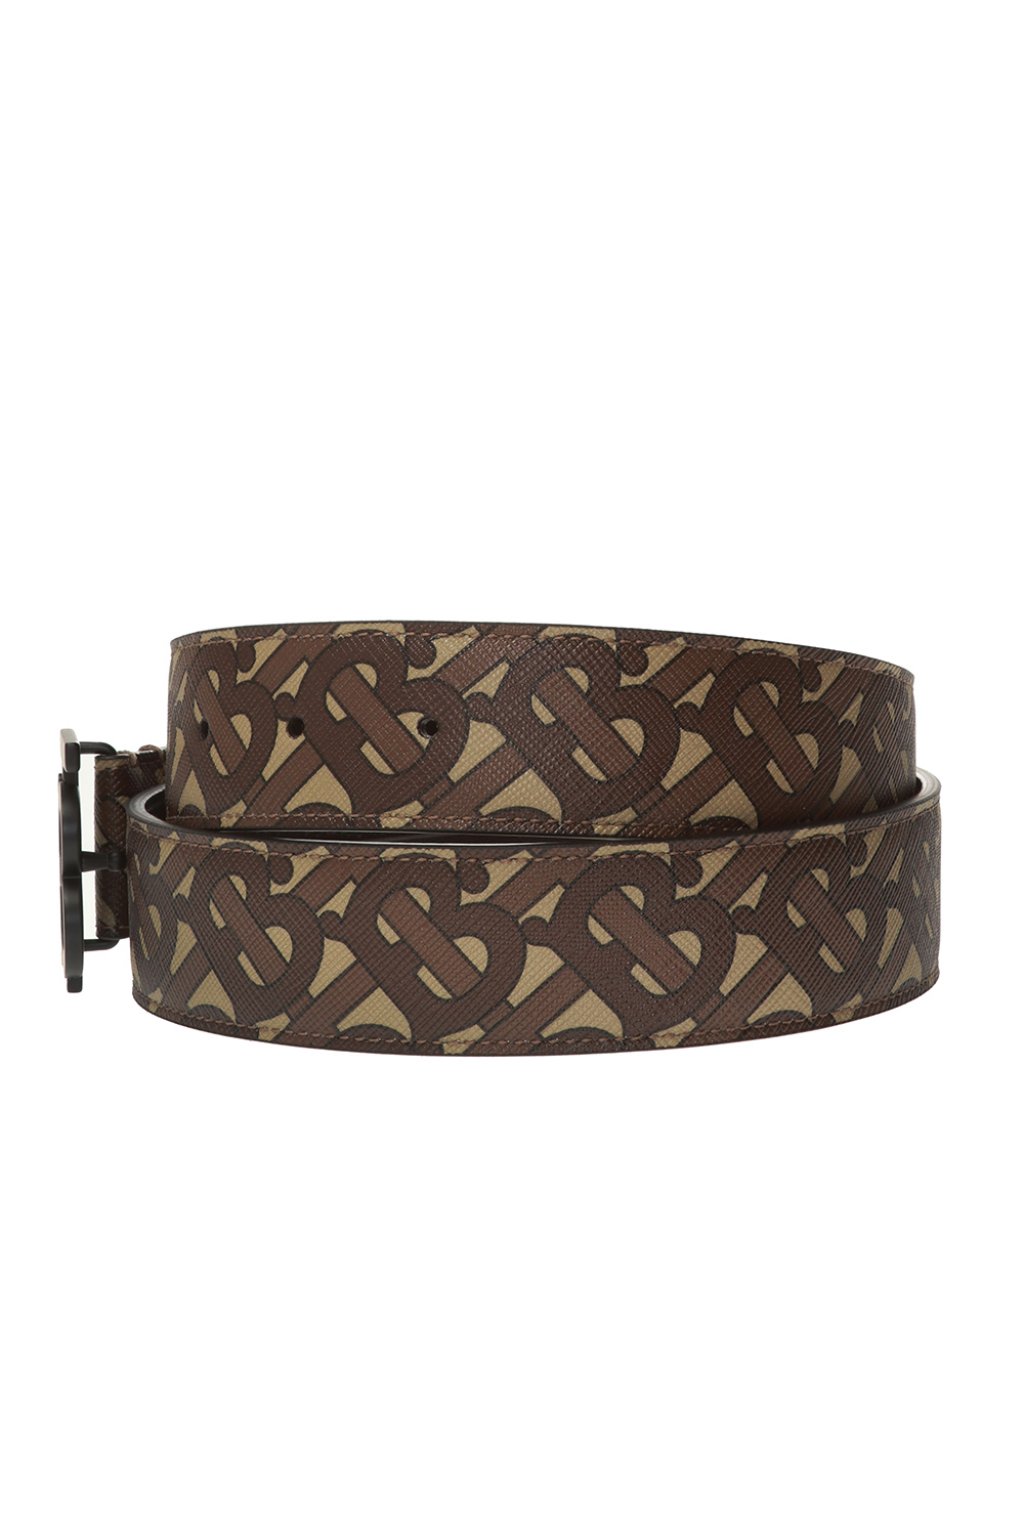 Burberry Bridle Brown Monogram Coated Canvas TB Buckle Belt S Burberry